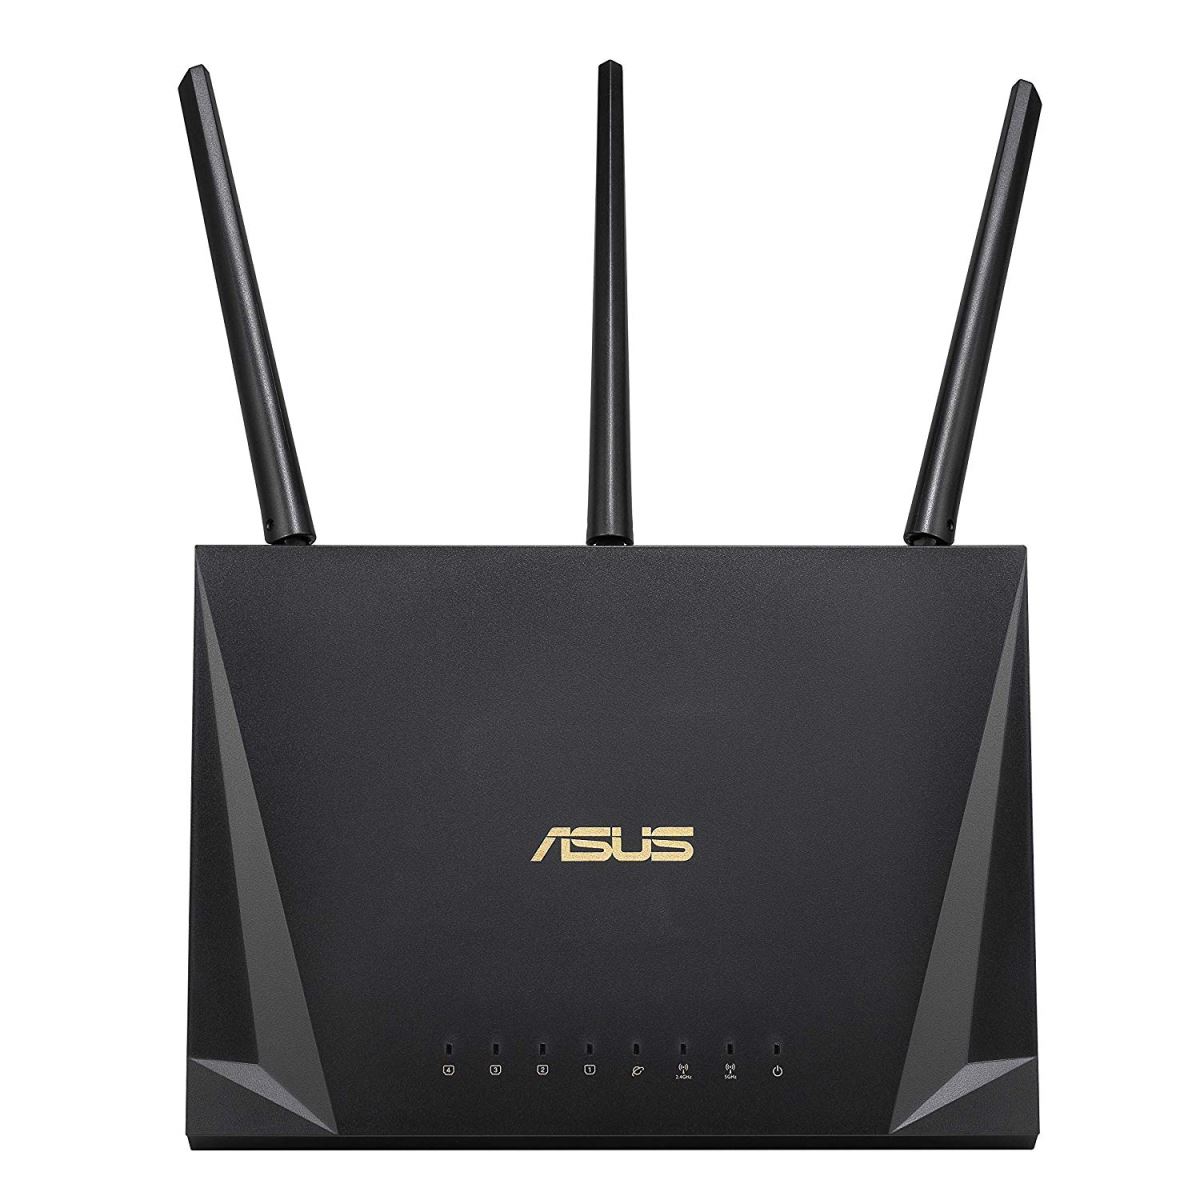 Router gaming Asus AC2400 Dual-Band RT-AC85P, IEEE 802.11a, IEEE 802.11b, IEEE 802.11g, IEEE 802.11n, IEEE 802.11ac, 600+1733 Mbps, 3 antene externe, 1 antena interna, 2.4 GHz/ 5 GHz